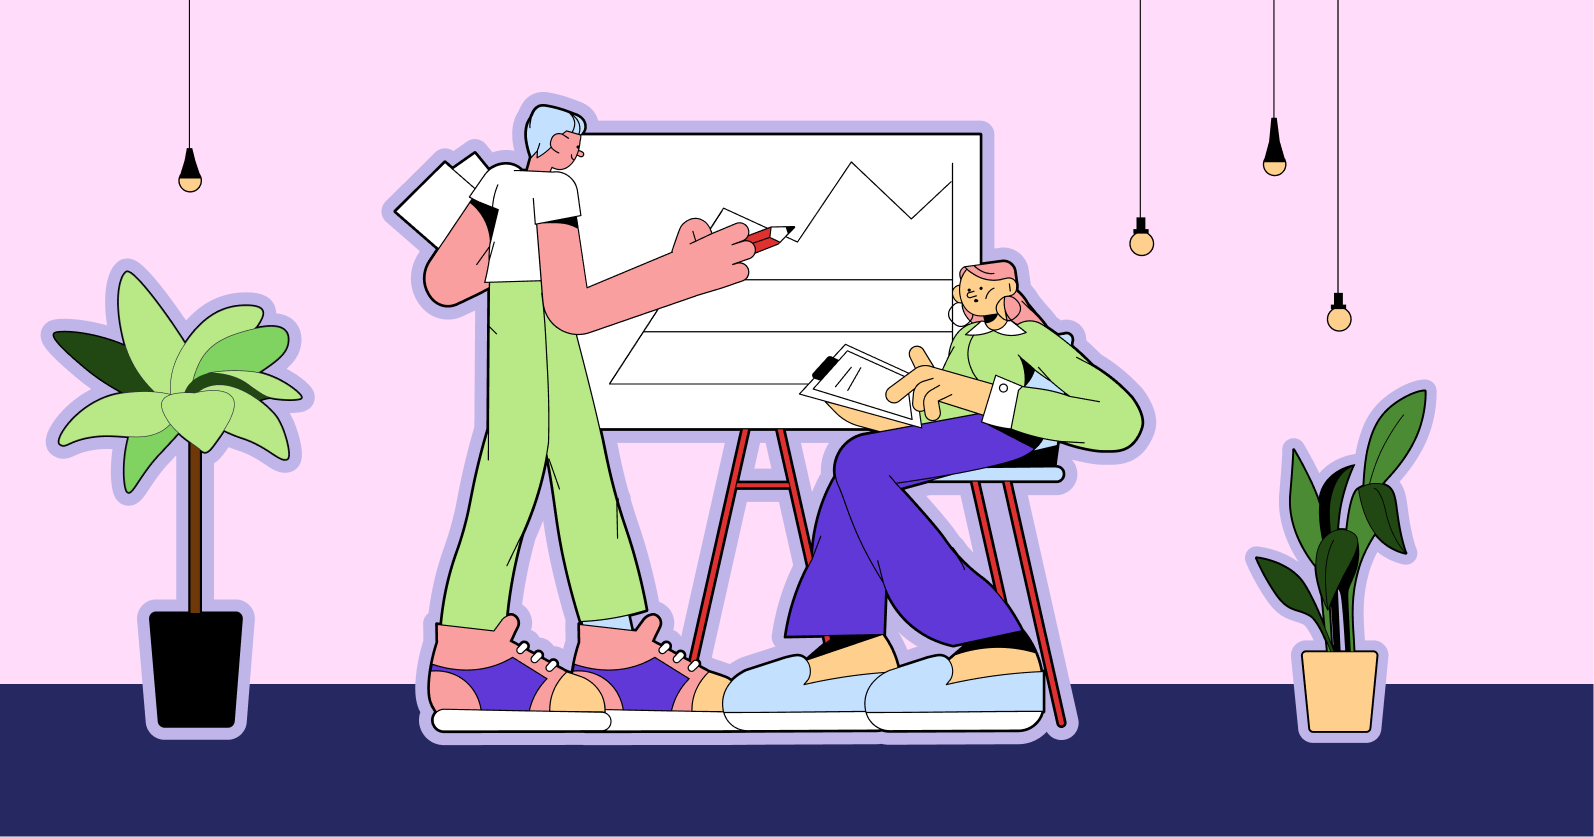 Illustration of people having a meeting and writing on a whiteboard.